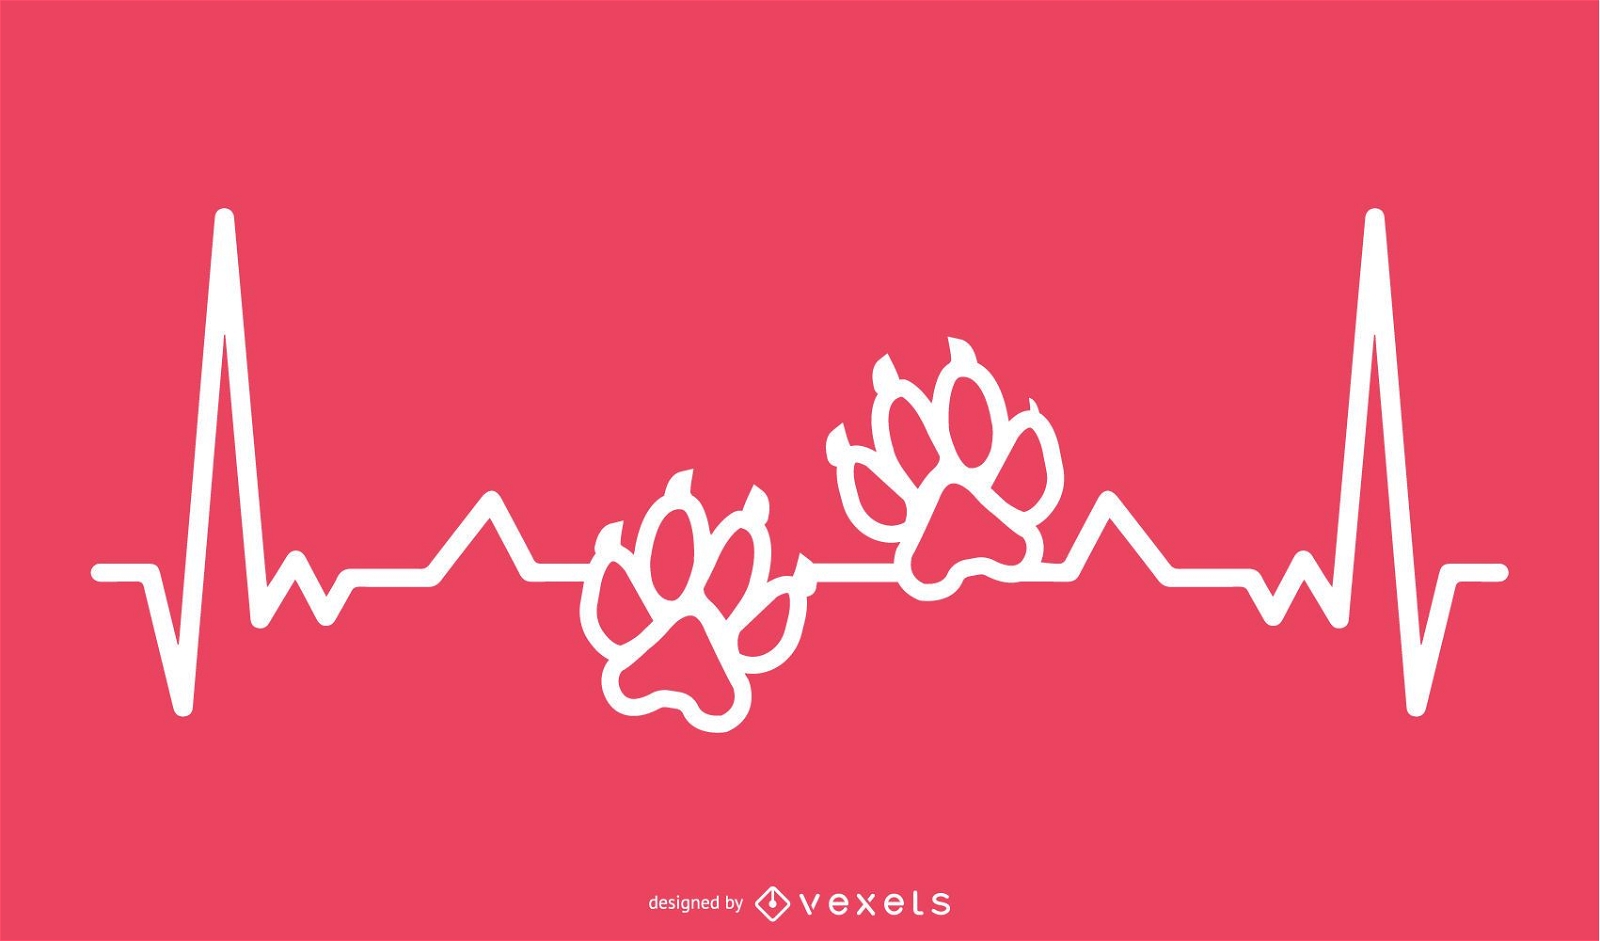 Animal Paw Print with Heartbeat Line Design